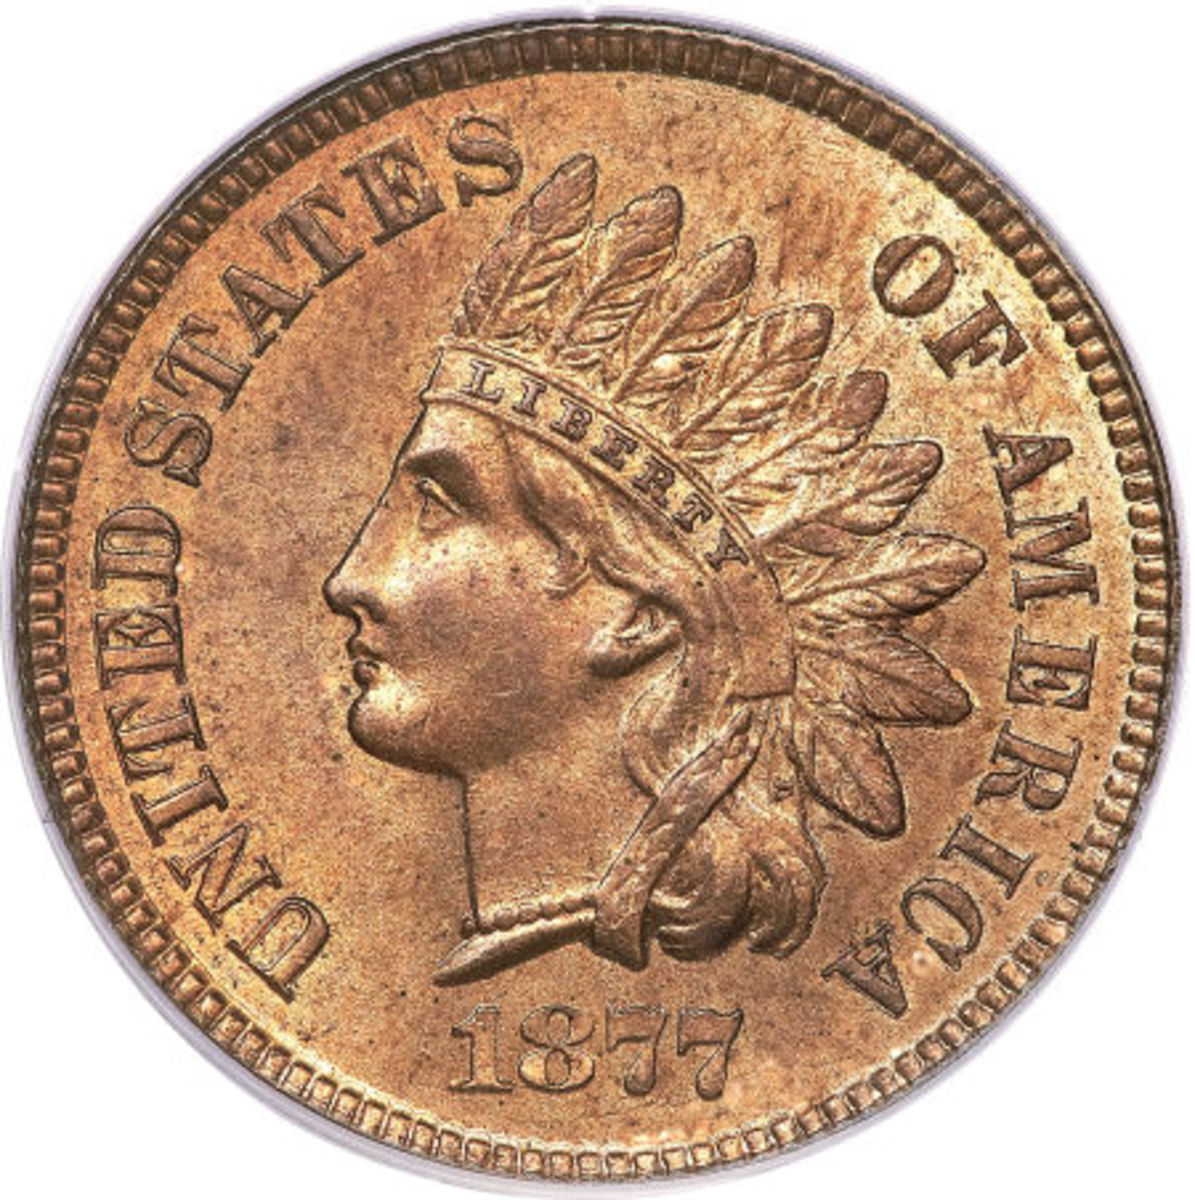 The Very Valuable 1877 Indian Head Cent